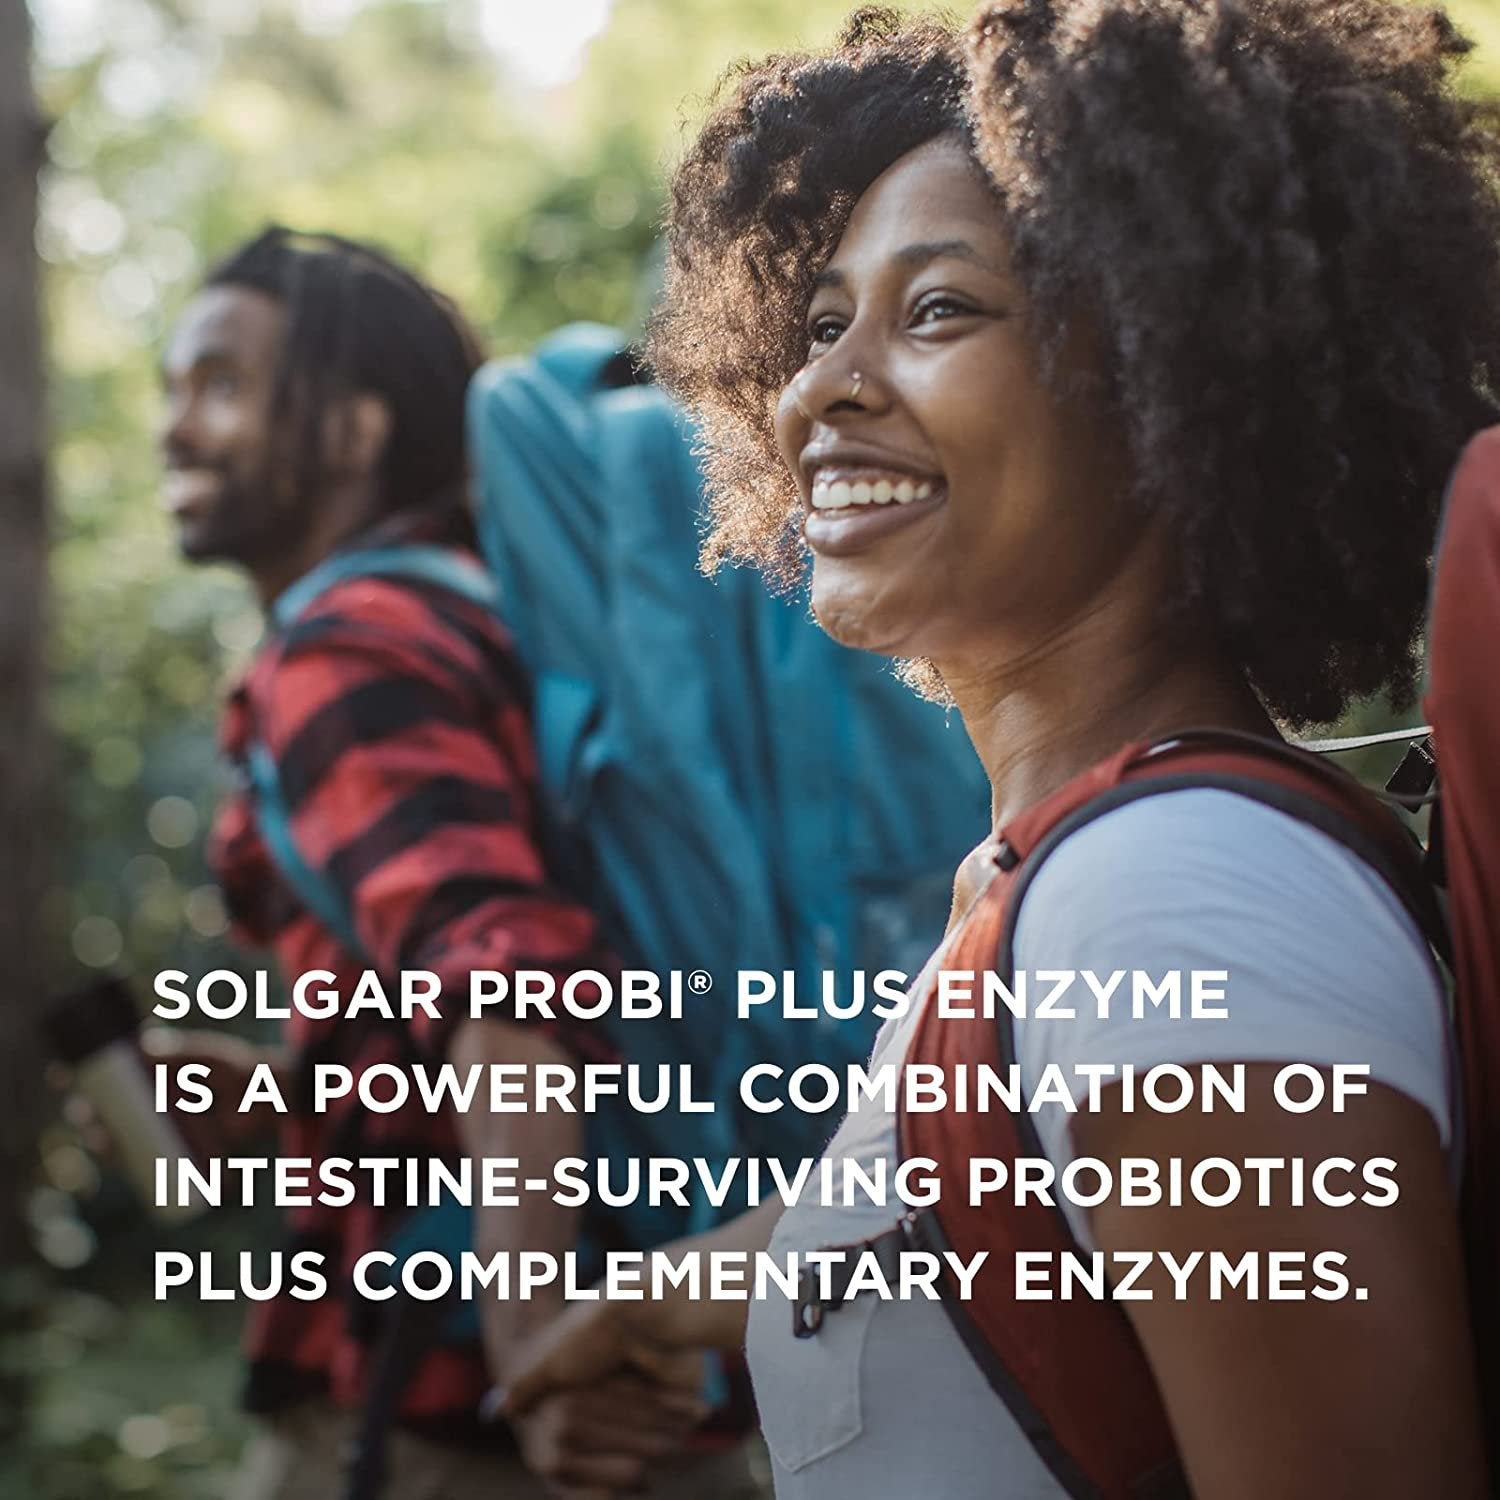 Solgar Probi Plus Enzyme Complex, 30 Capsules - 20 Billion CFU Probiotic Plus Enzymes - Once Daily - Clinically-Studied to Alleviate Occasional Gas & Bloating - Non-GMO & Dairy Free, 30 Servings